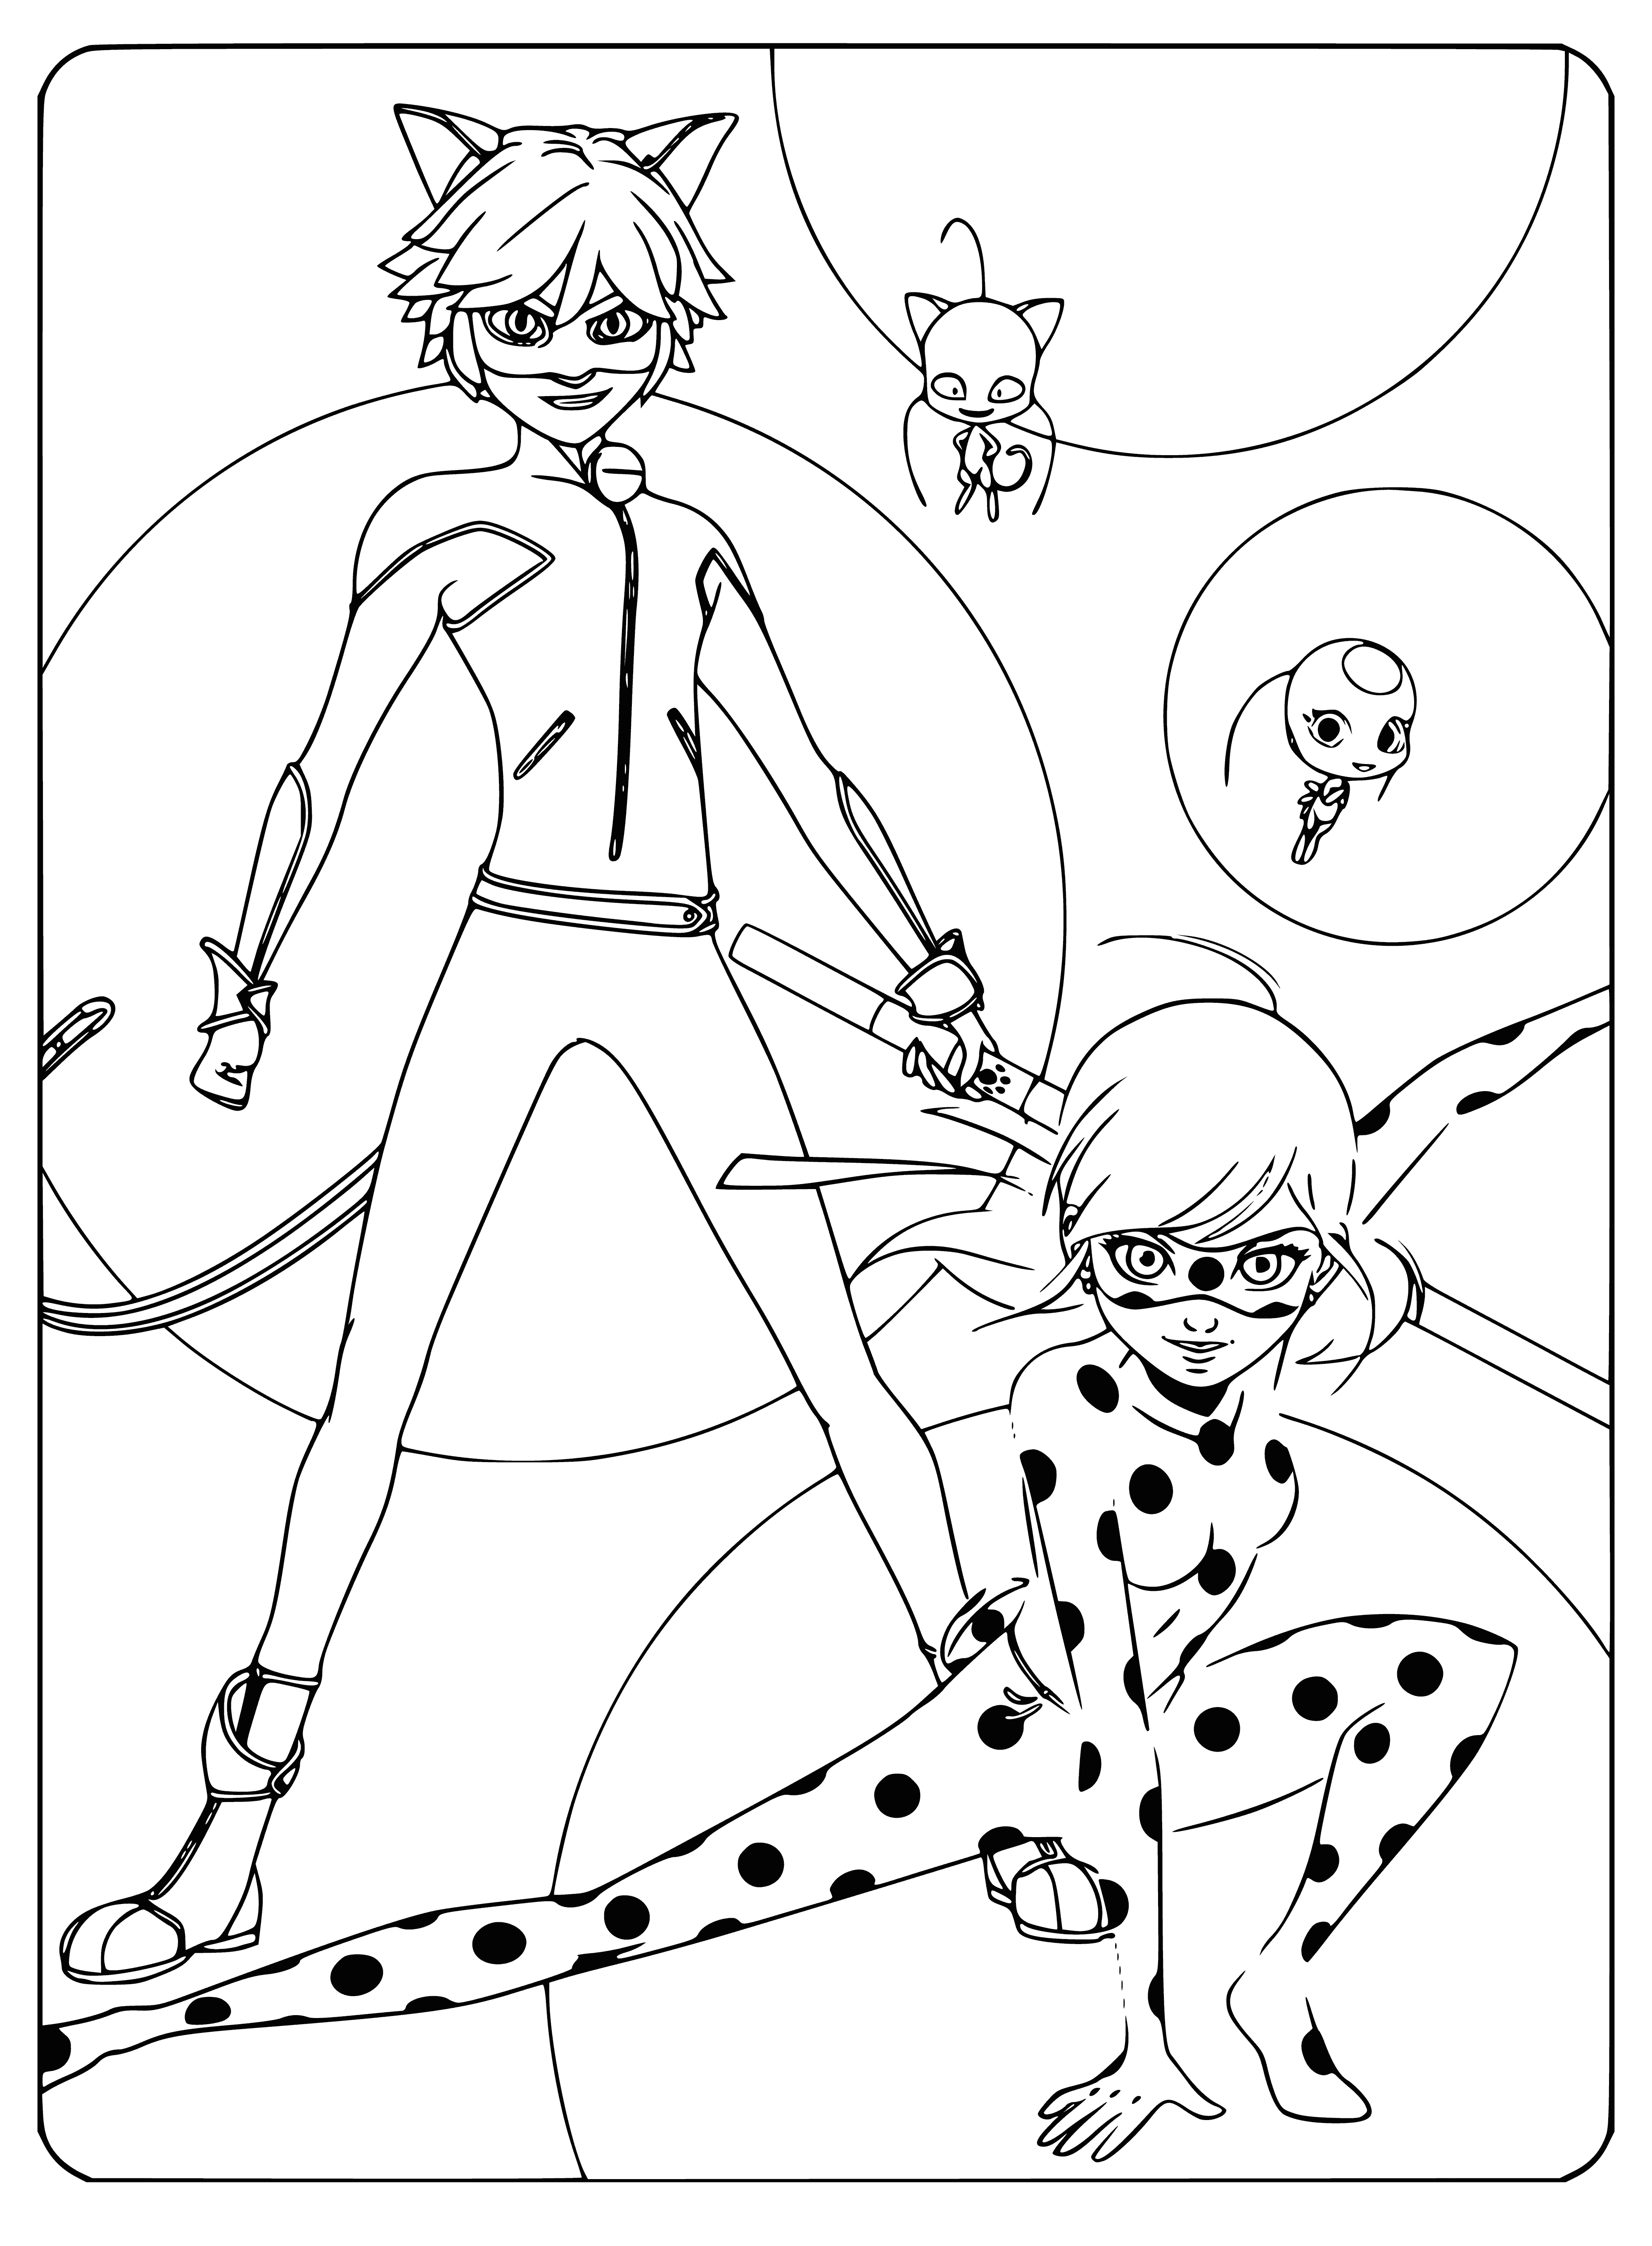 Super Cat and Plugg, Lady Bug and Tikki coloring page